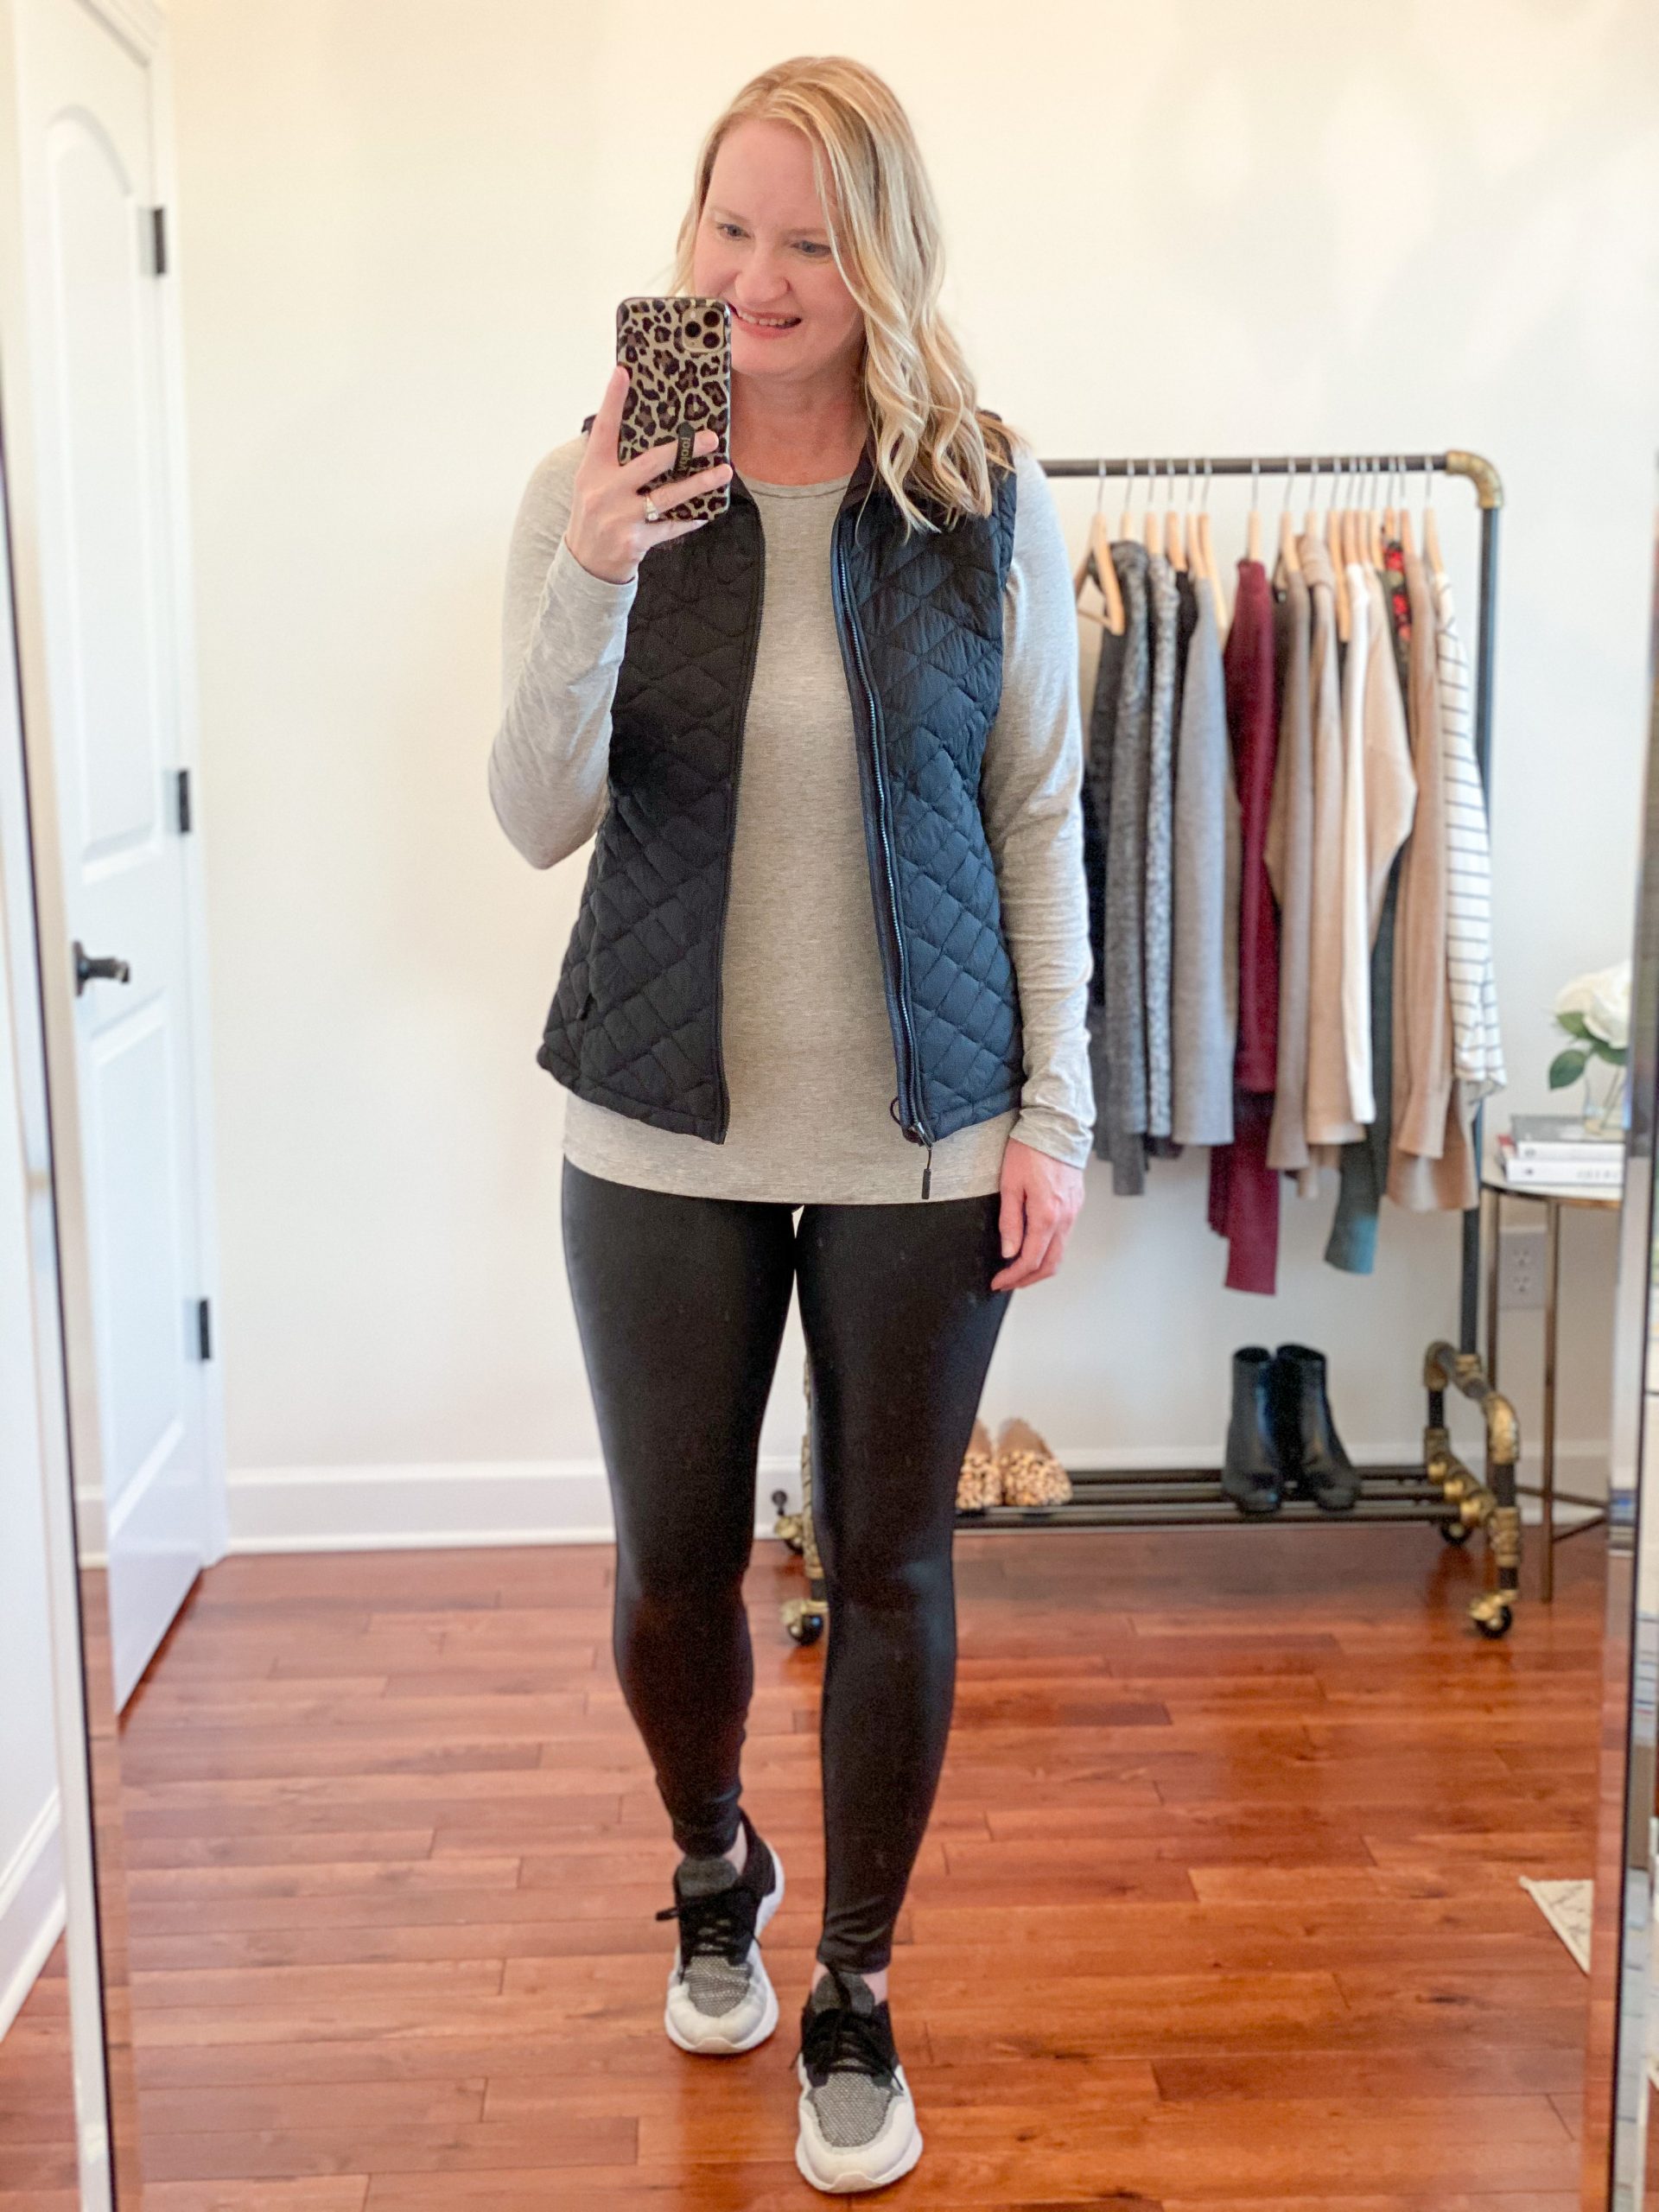 Are Leggings Still in Style in 2022? + 2 Outfits